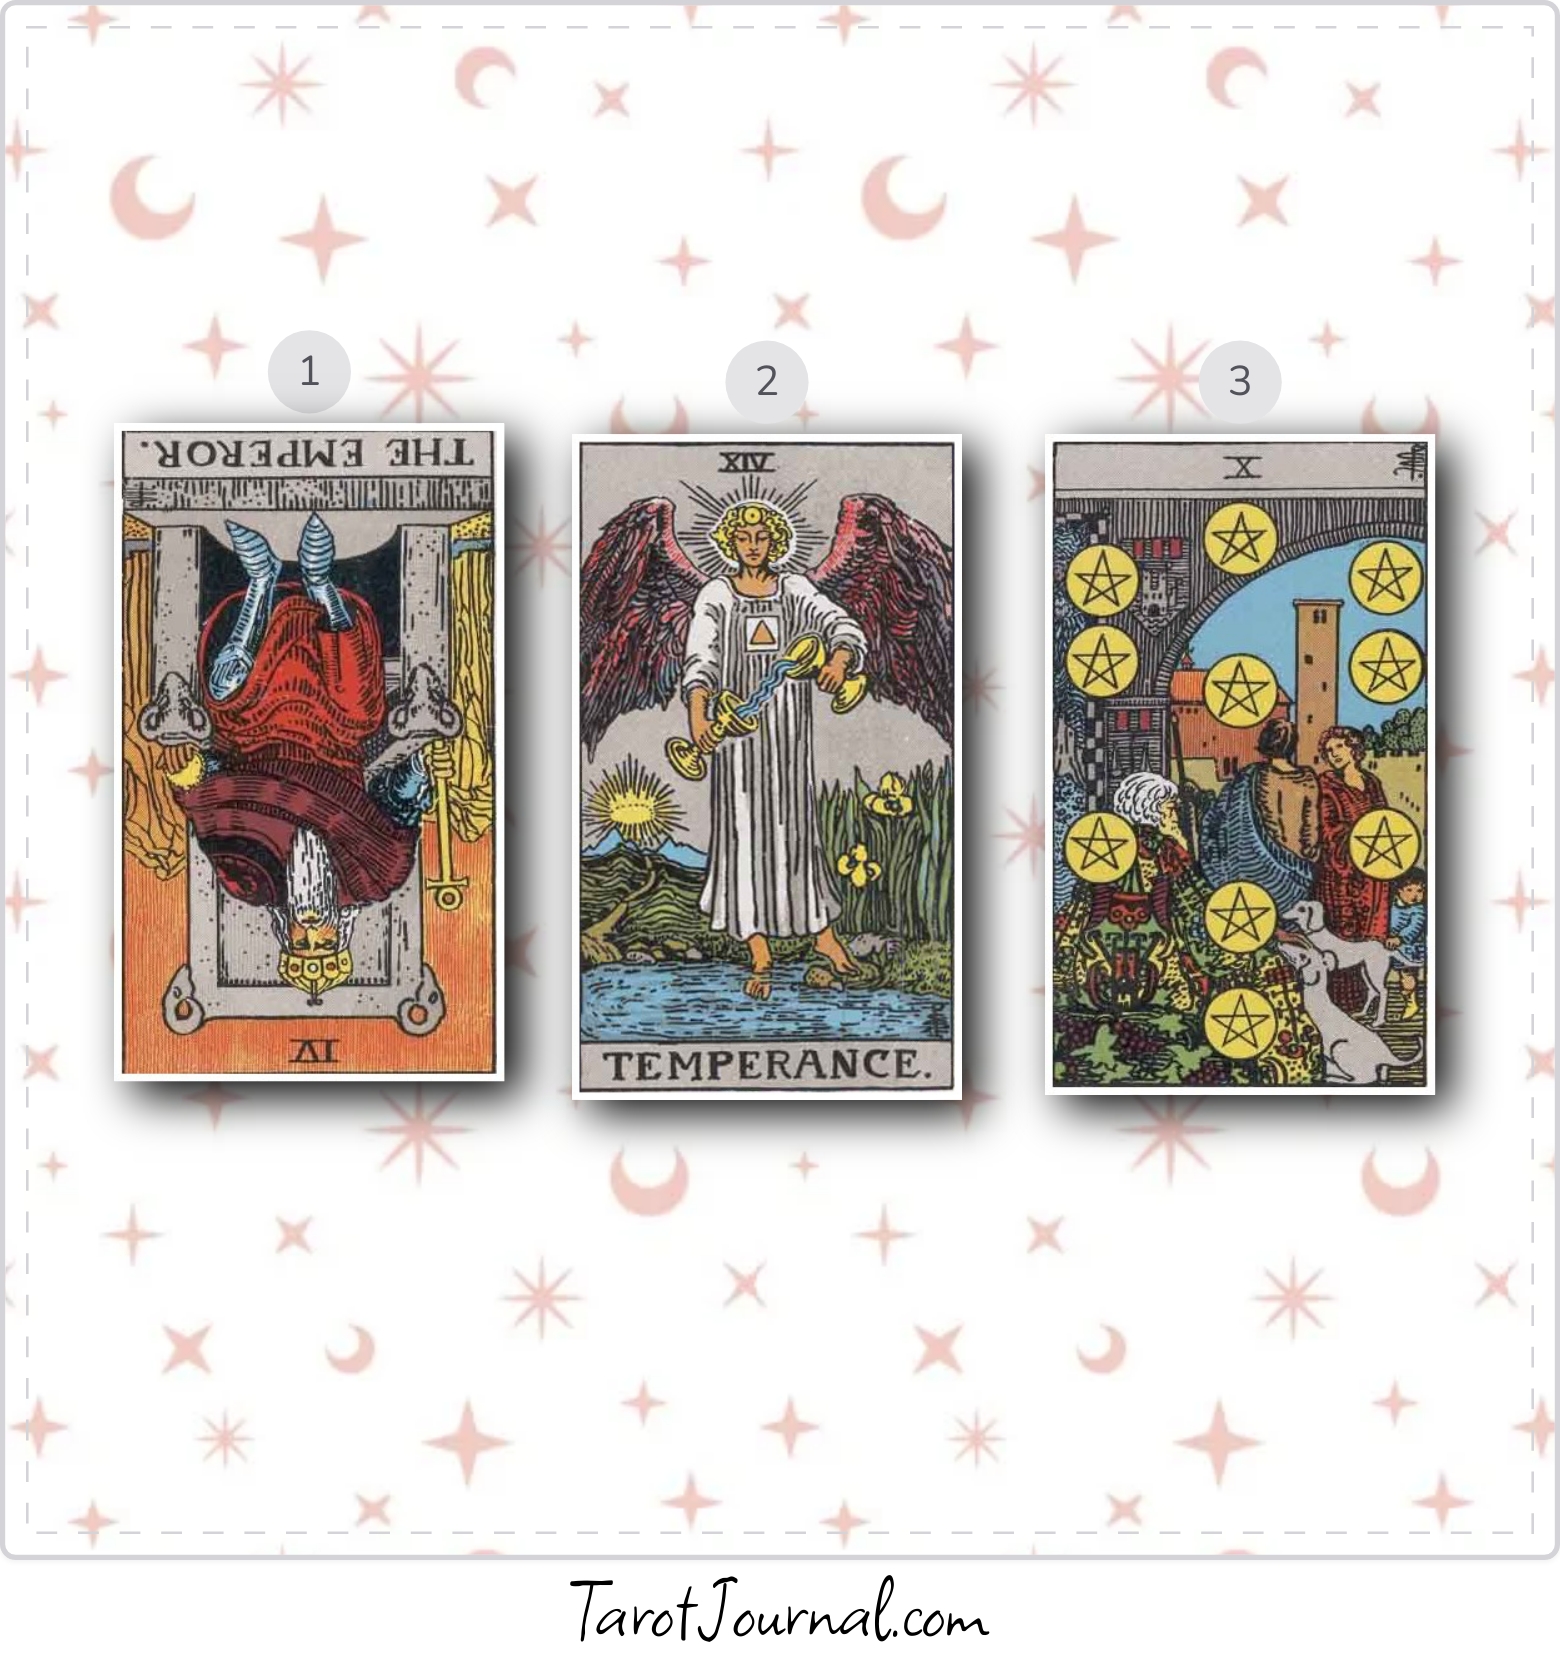 Reflection on my current thoughts, feelings, and actionable direction - tarot reading by Solange Maya